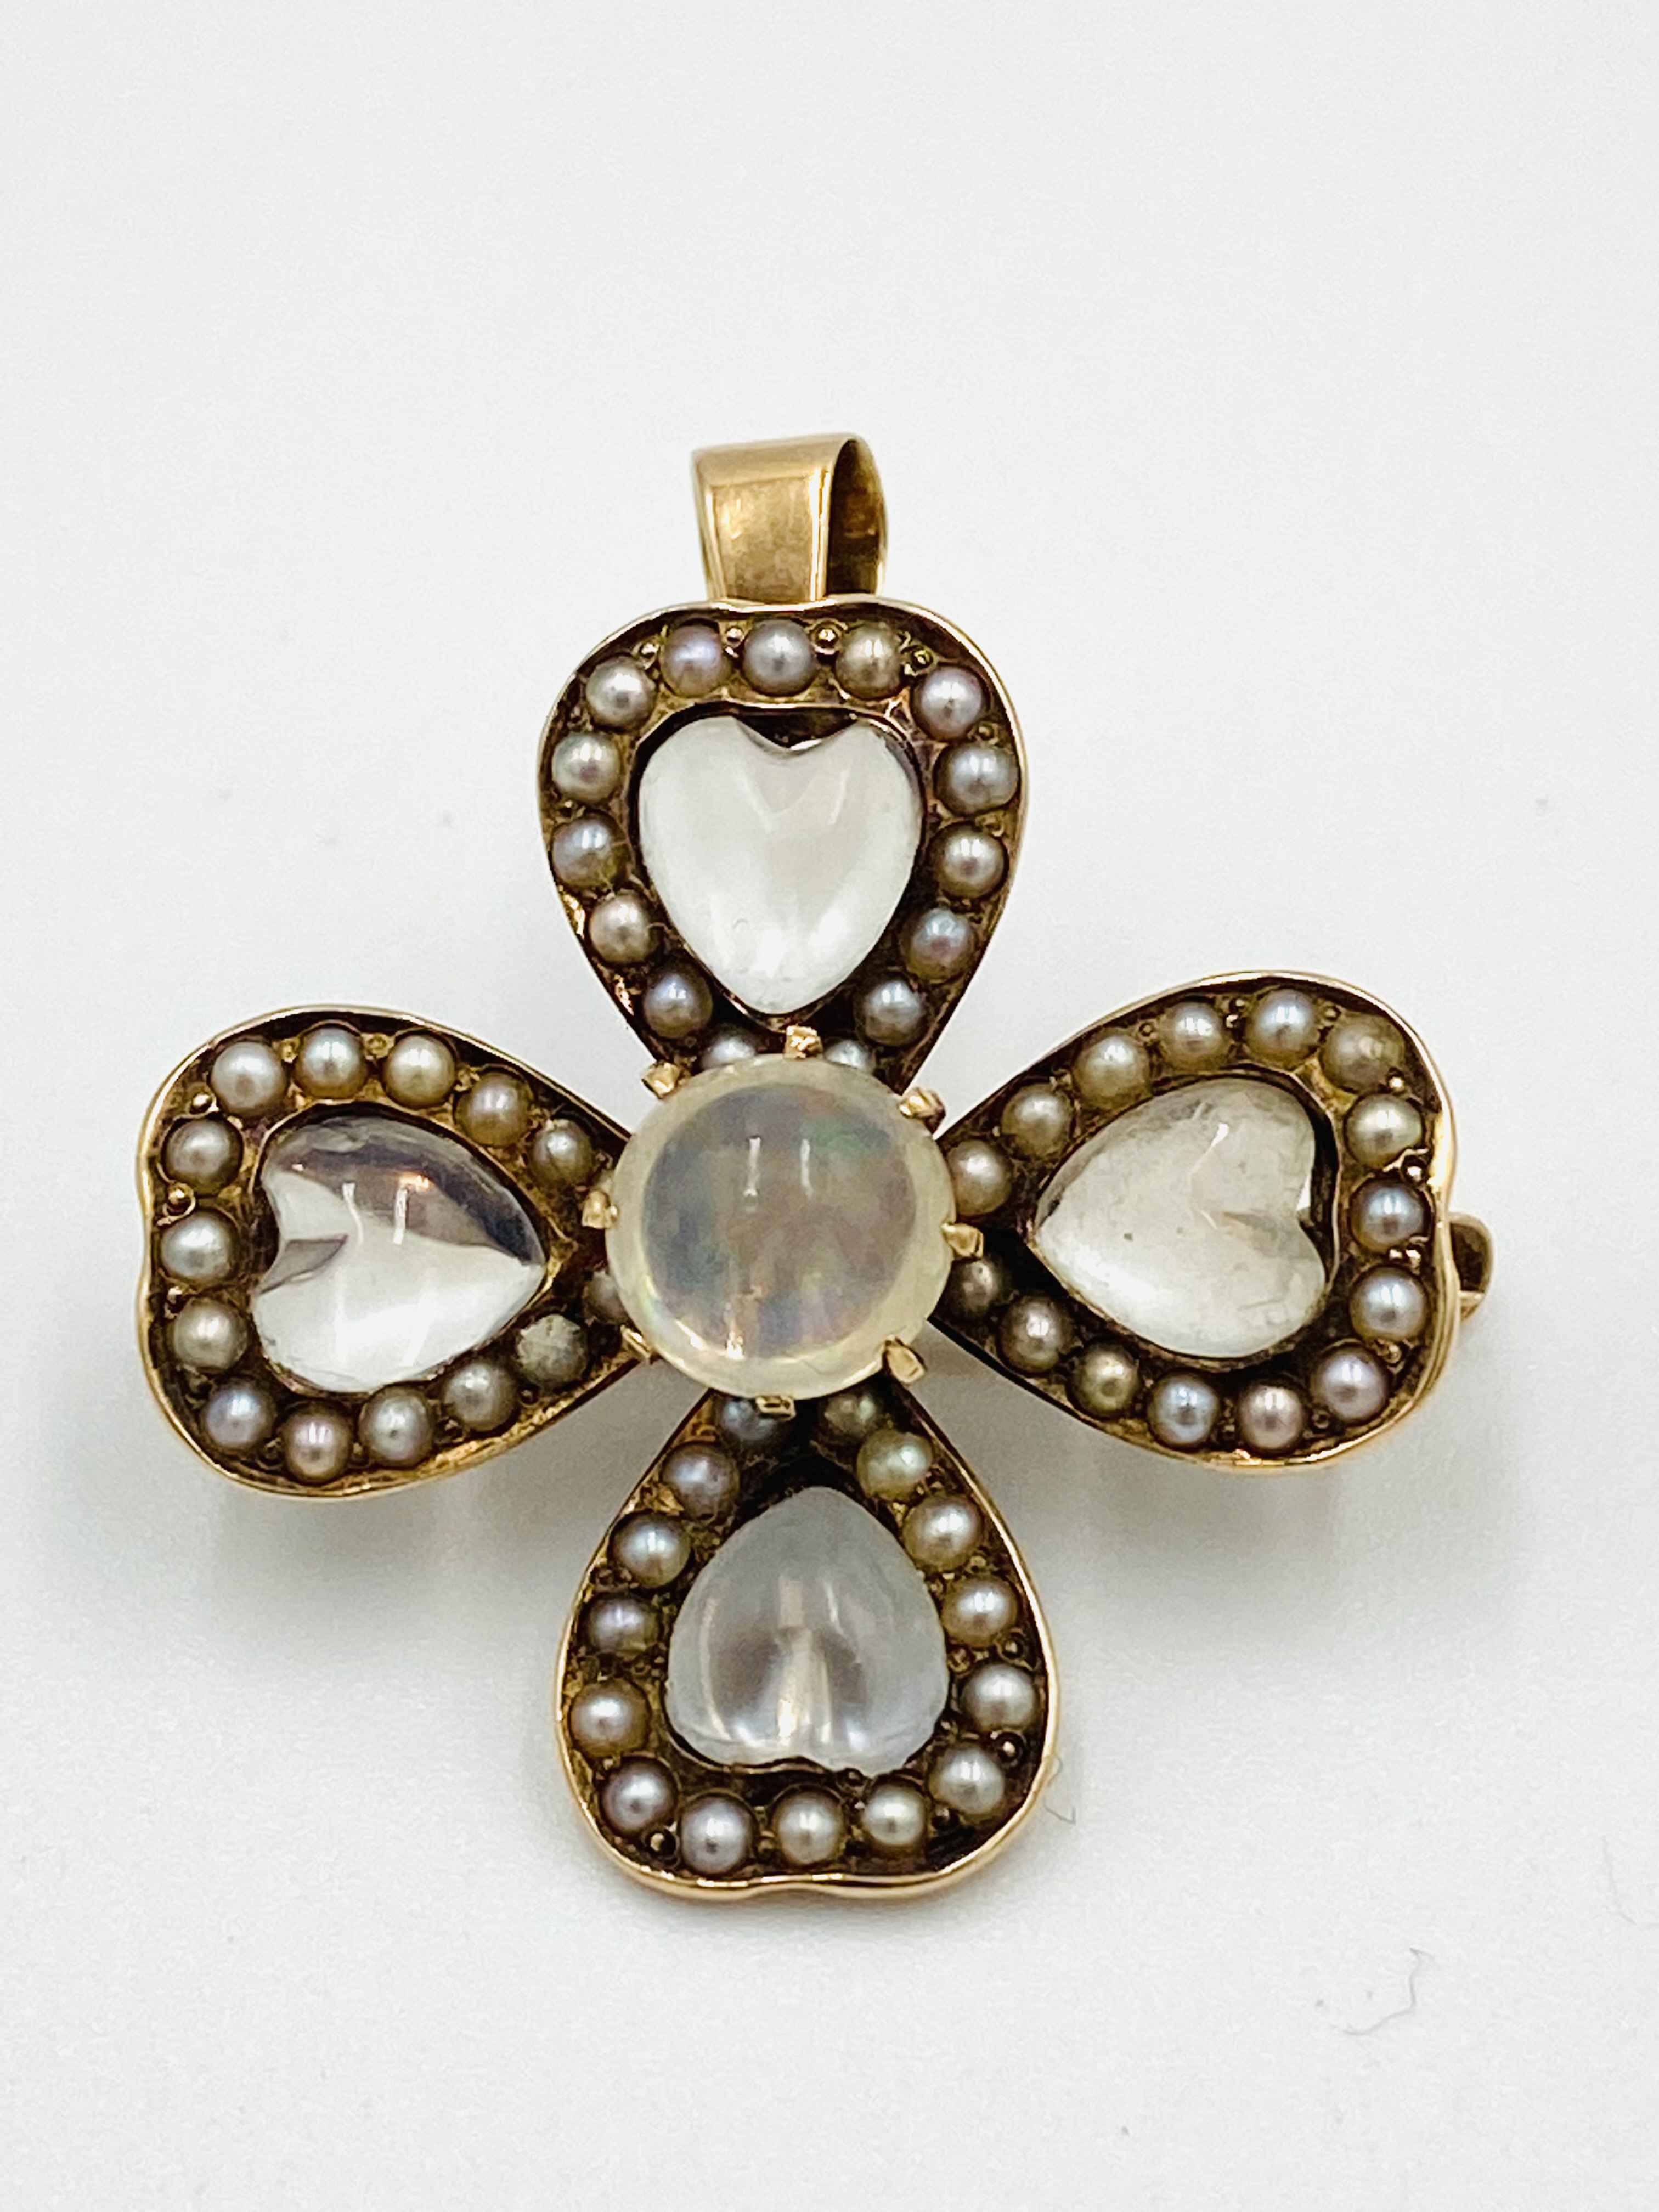 Gold flower pendant set with moonstone - Image 2 of 6